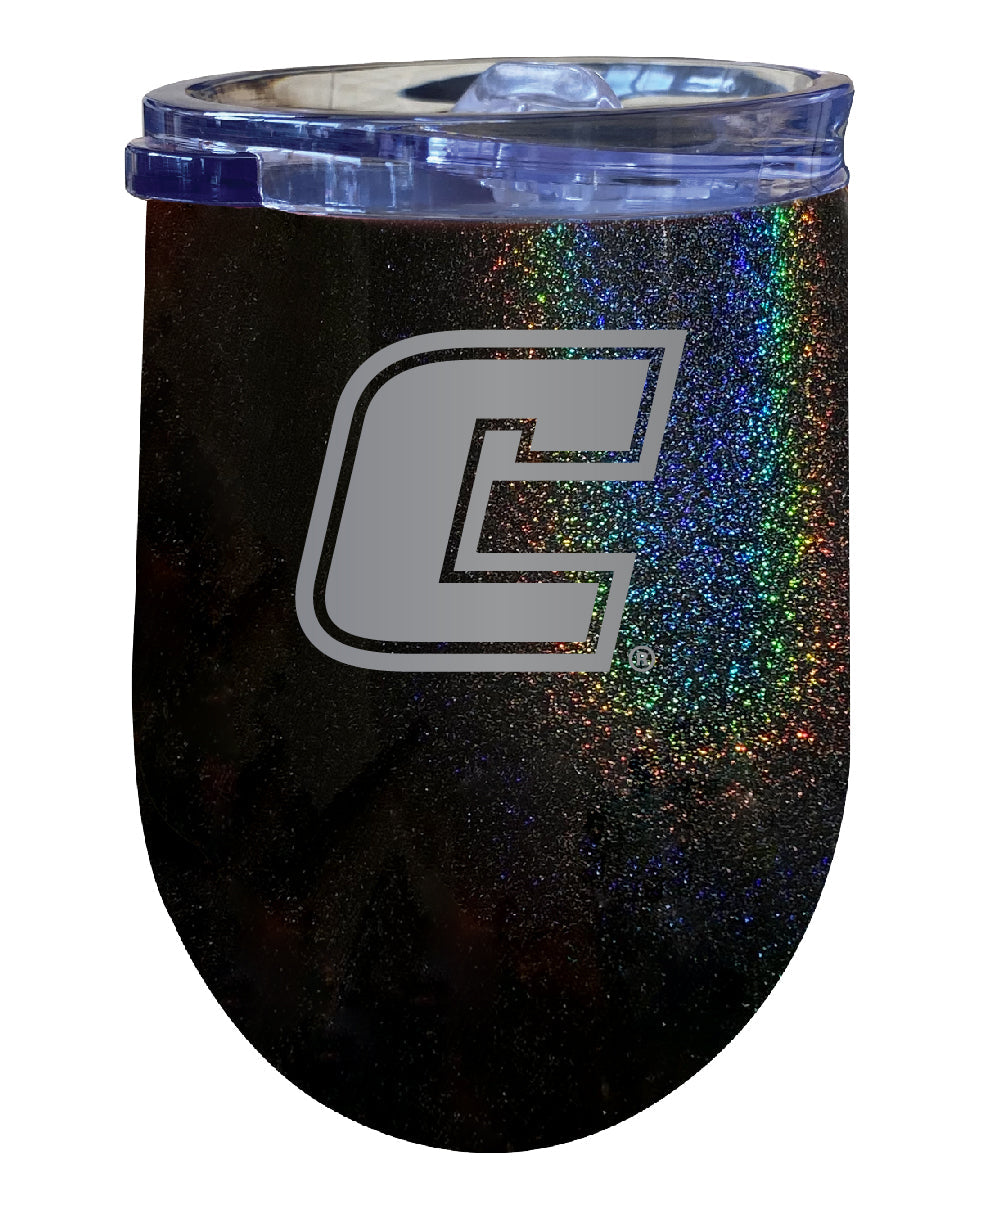 University of Tennessee at Chattanooga NCAA Laser-Etched Wine Tumbler - 12oz Rainbow Glitter Black Stainless Steel Insulated Cup